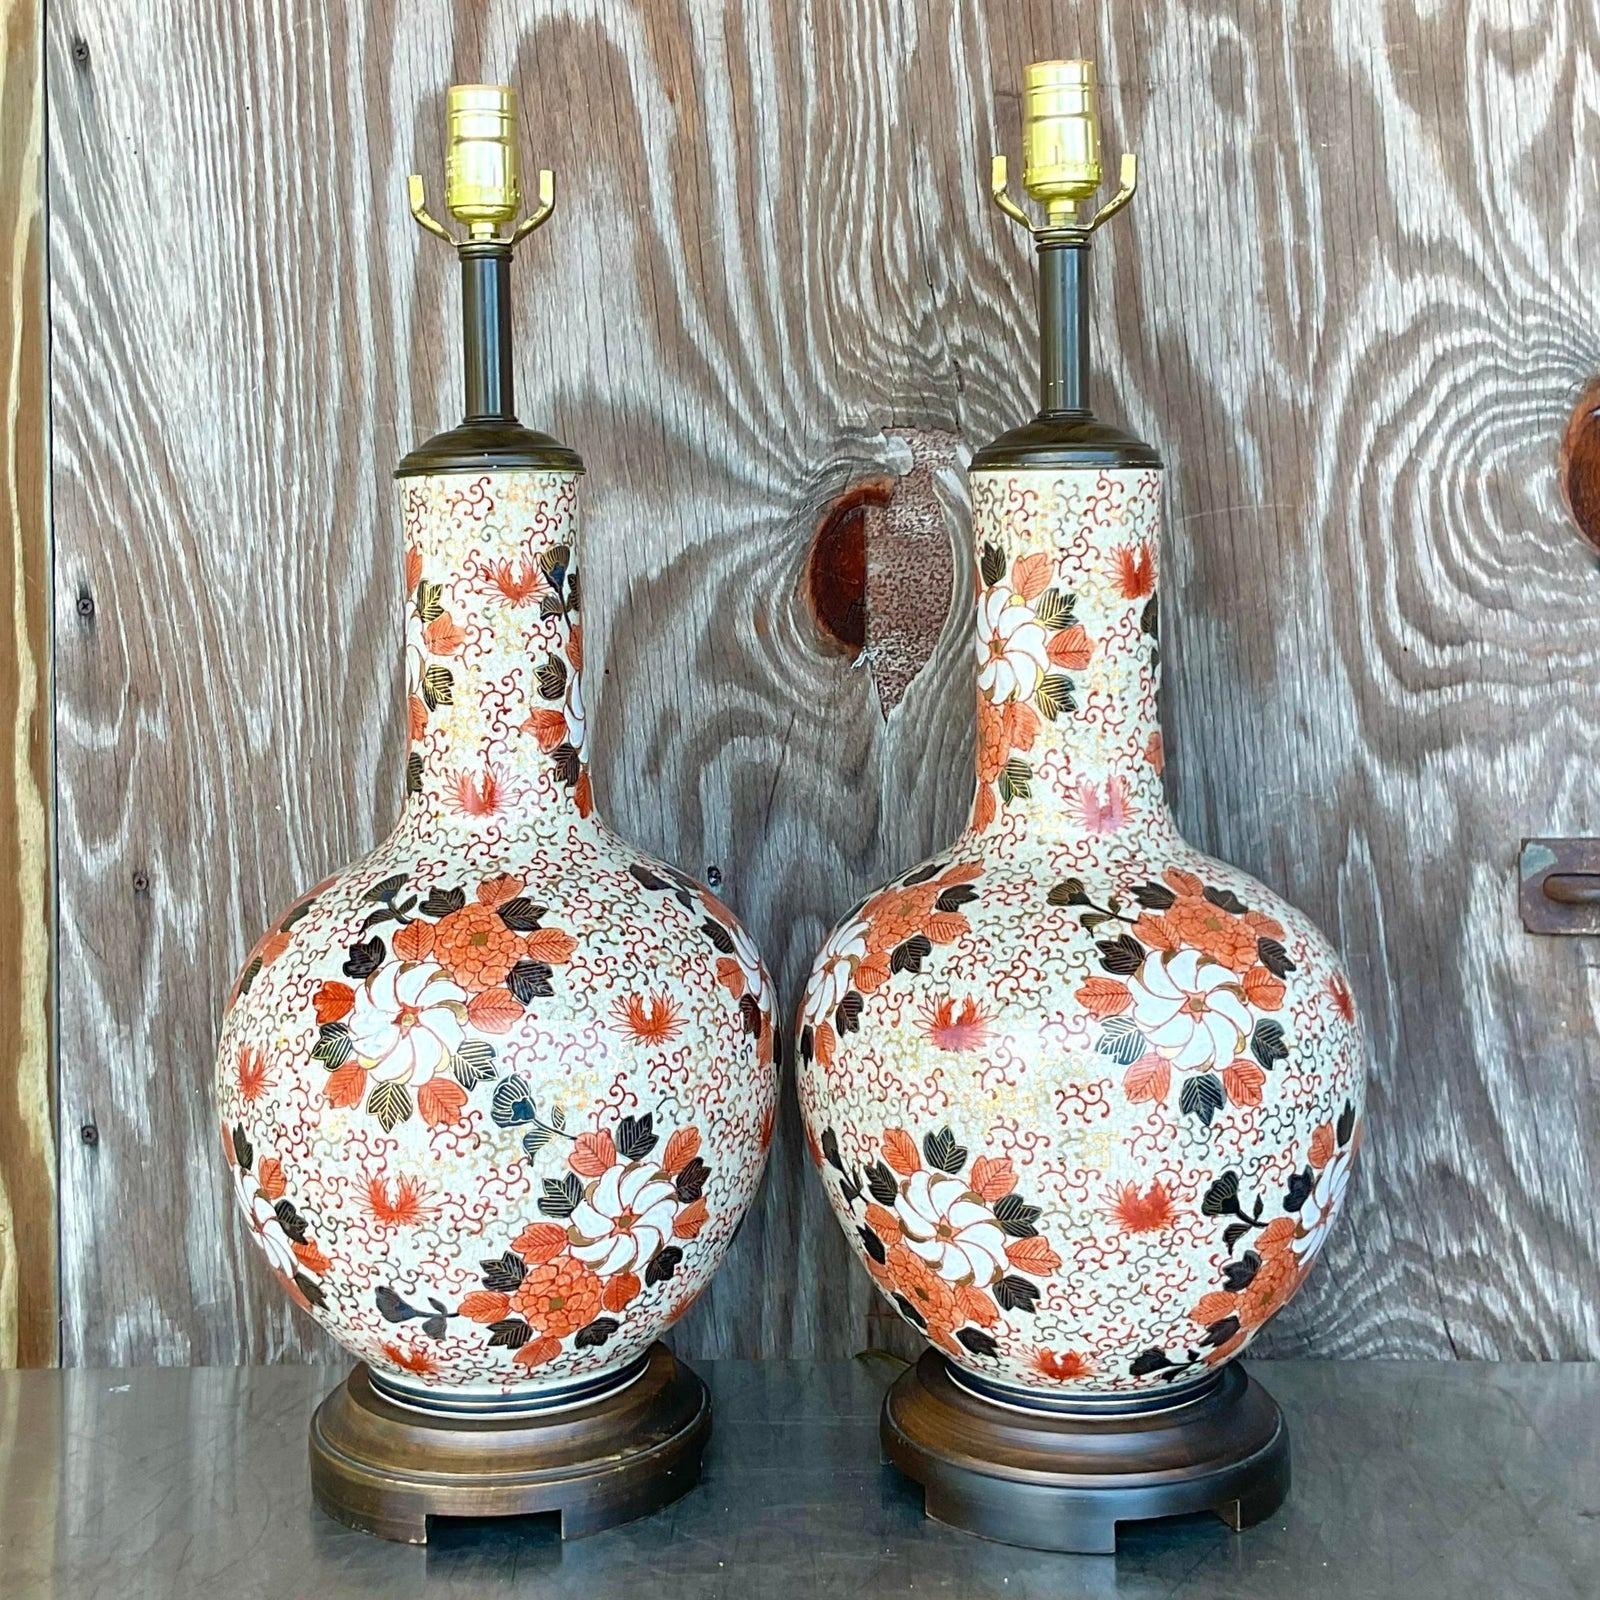 A gorgeous pair of vintage Regency Gourd table lamps. A chic Imari Flow design in deep rich colors. Acquired from a Palm Beach estate. 